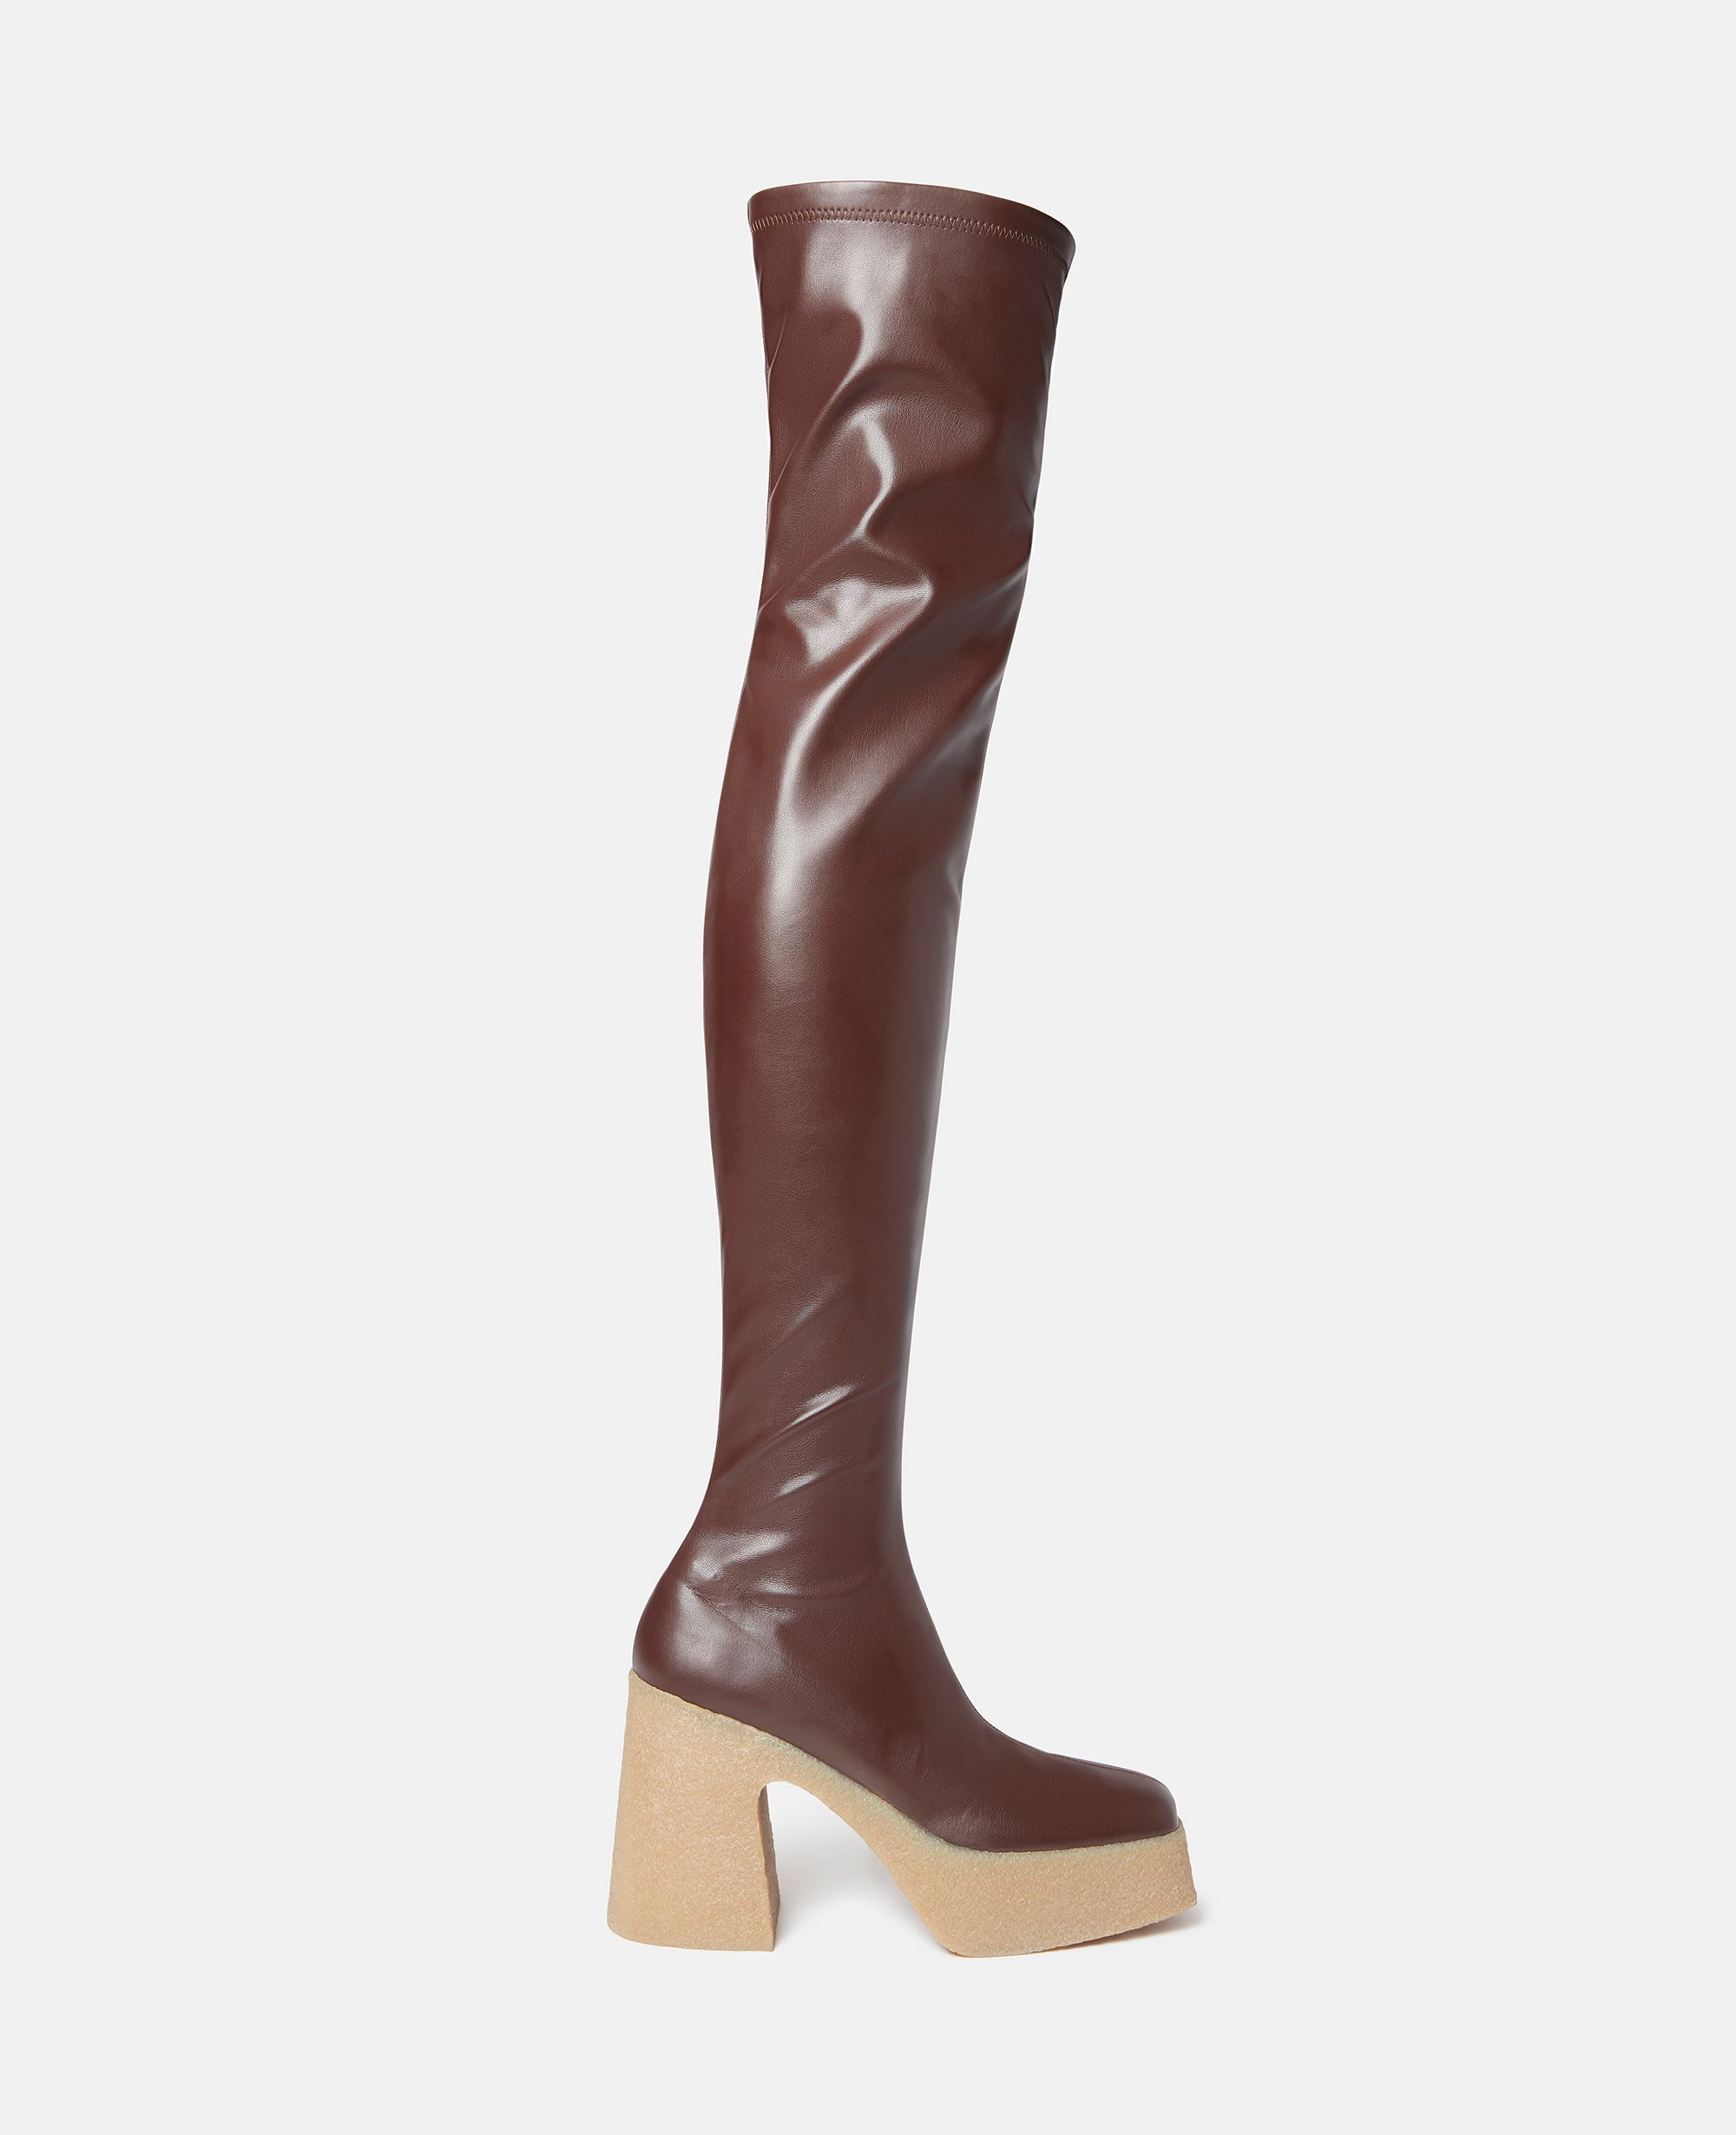 Stella Mccartney Skyla Stretch Over-the-knee Boots In Chocolate Brown